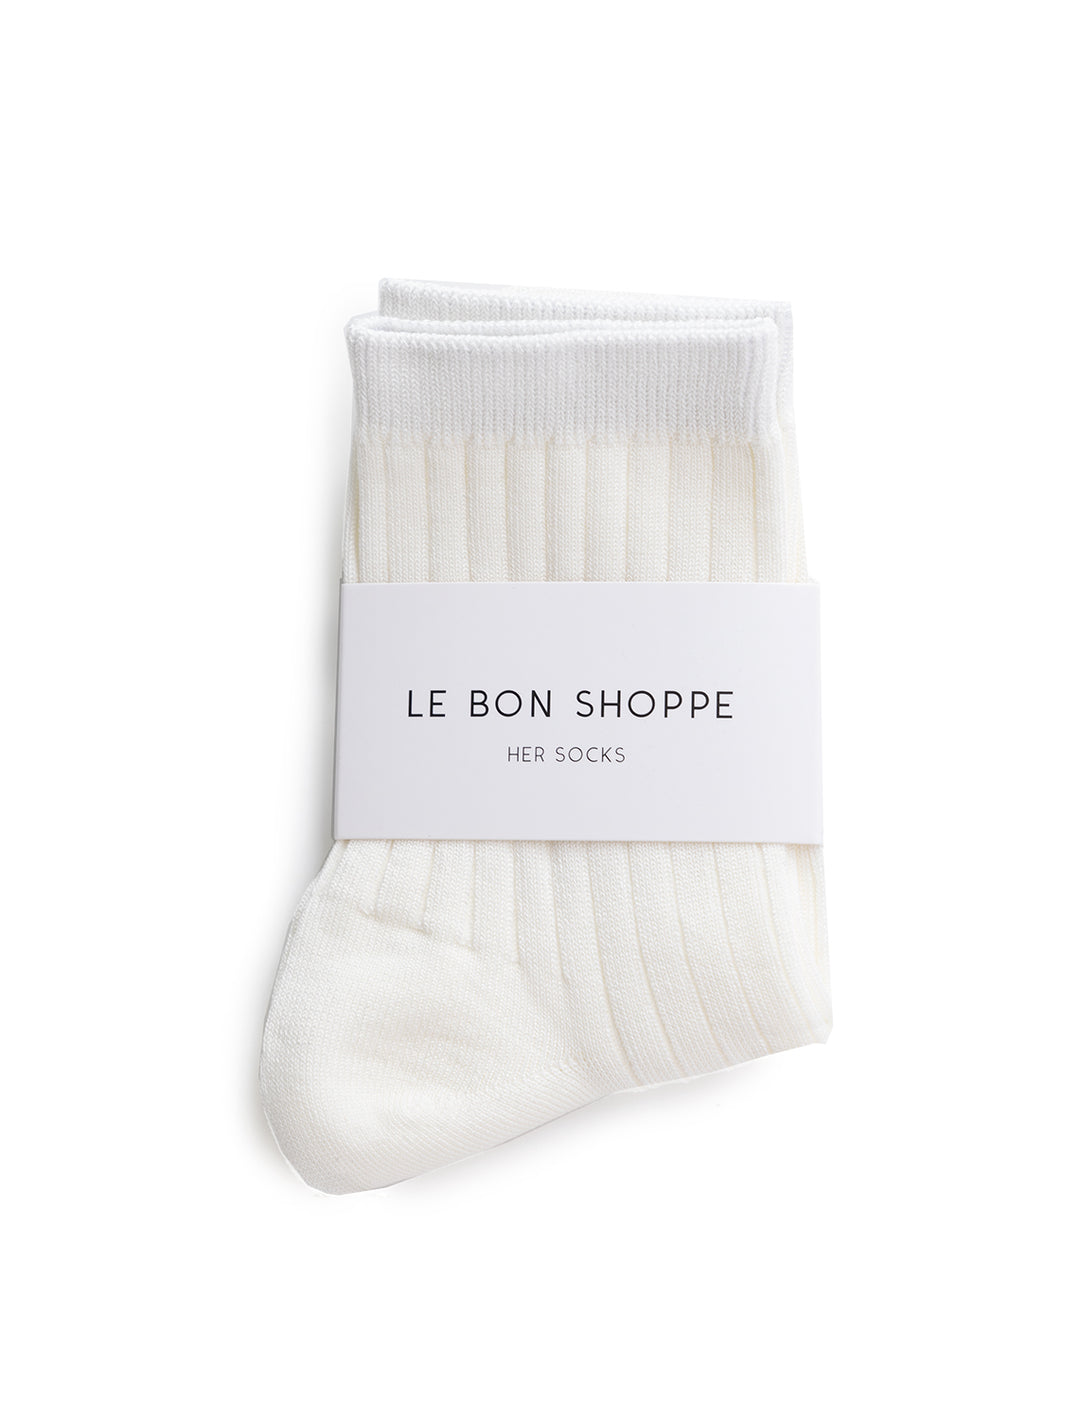 Front view of Le Bon Shoppe's her socks in classic white.